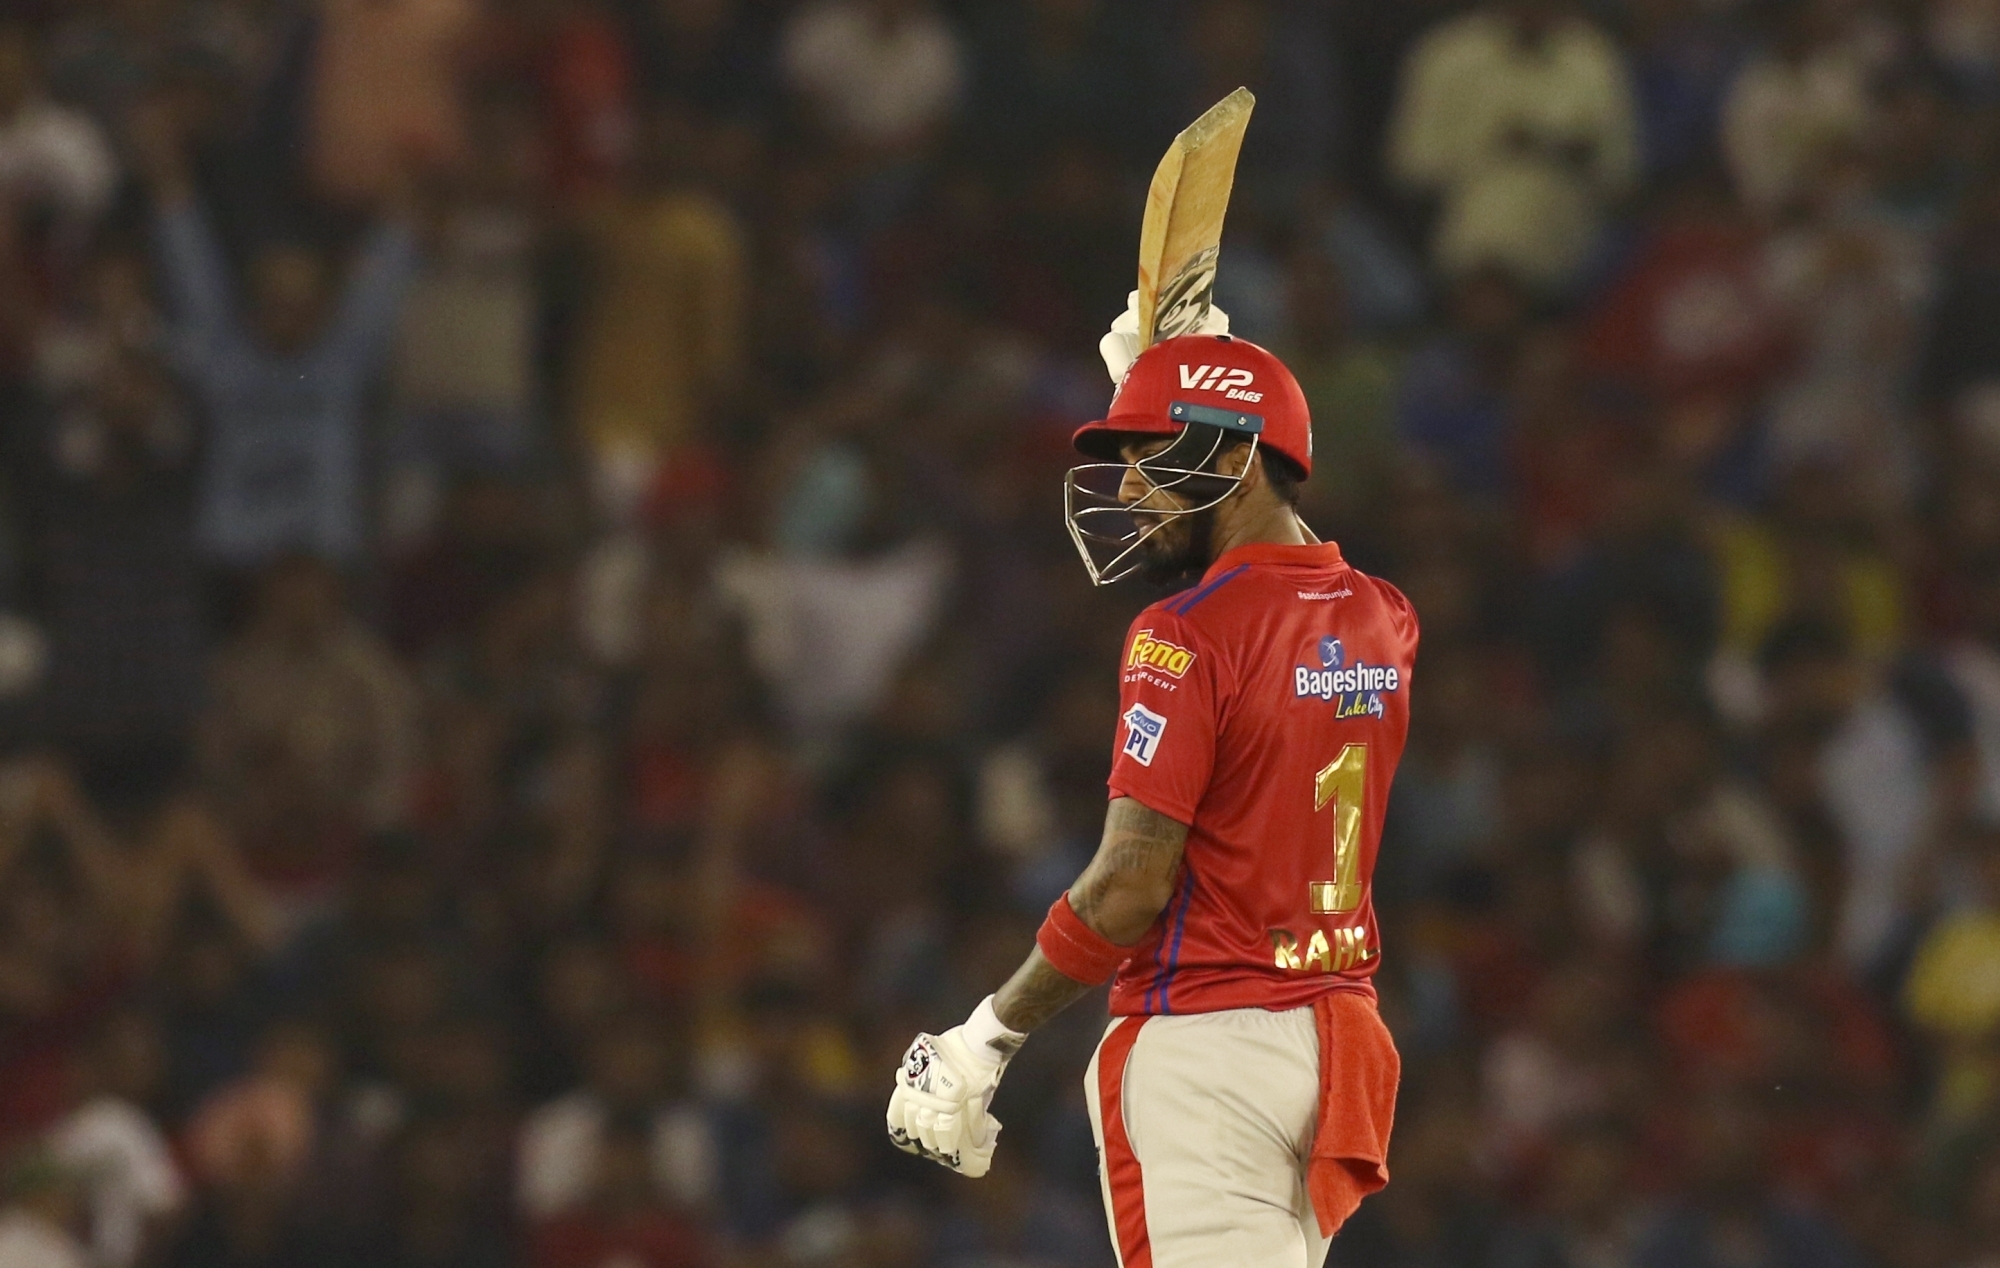 Ipl 2019 Kl Rahul Says He Never Tries To Be A Hero When Chris Gayle Bats In Full Flow